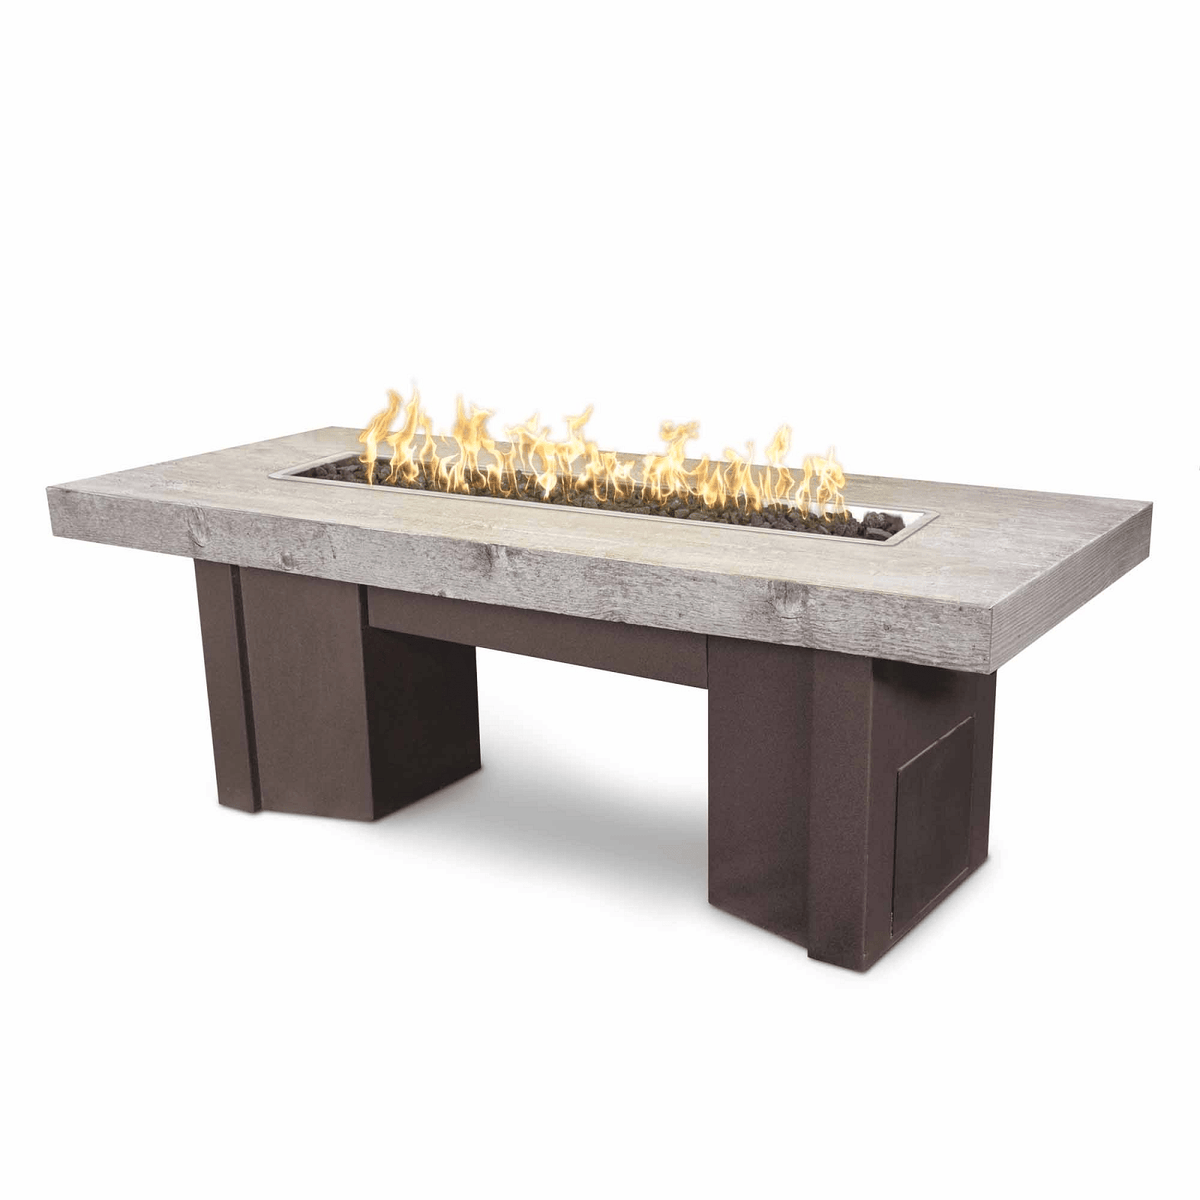 The Outdoor Plus Fire Features The Outdoor Plus 78&quot; Alameda Fire Table Wood Grain - Flame Sense System with Push Button Spark Igniter / OPT-ALMWG78FSEN